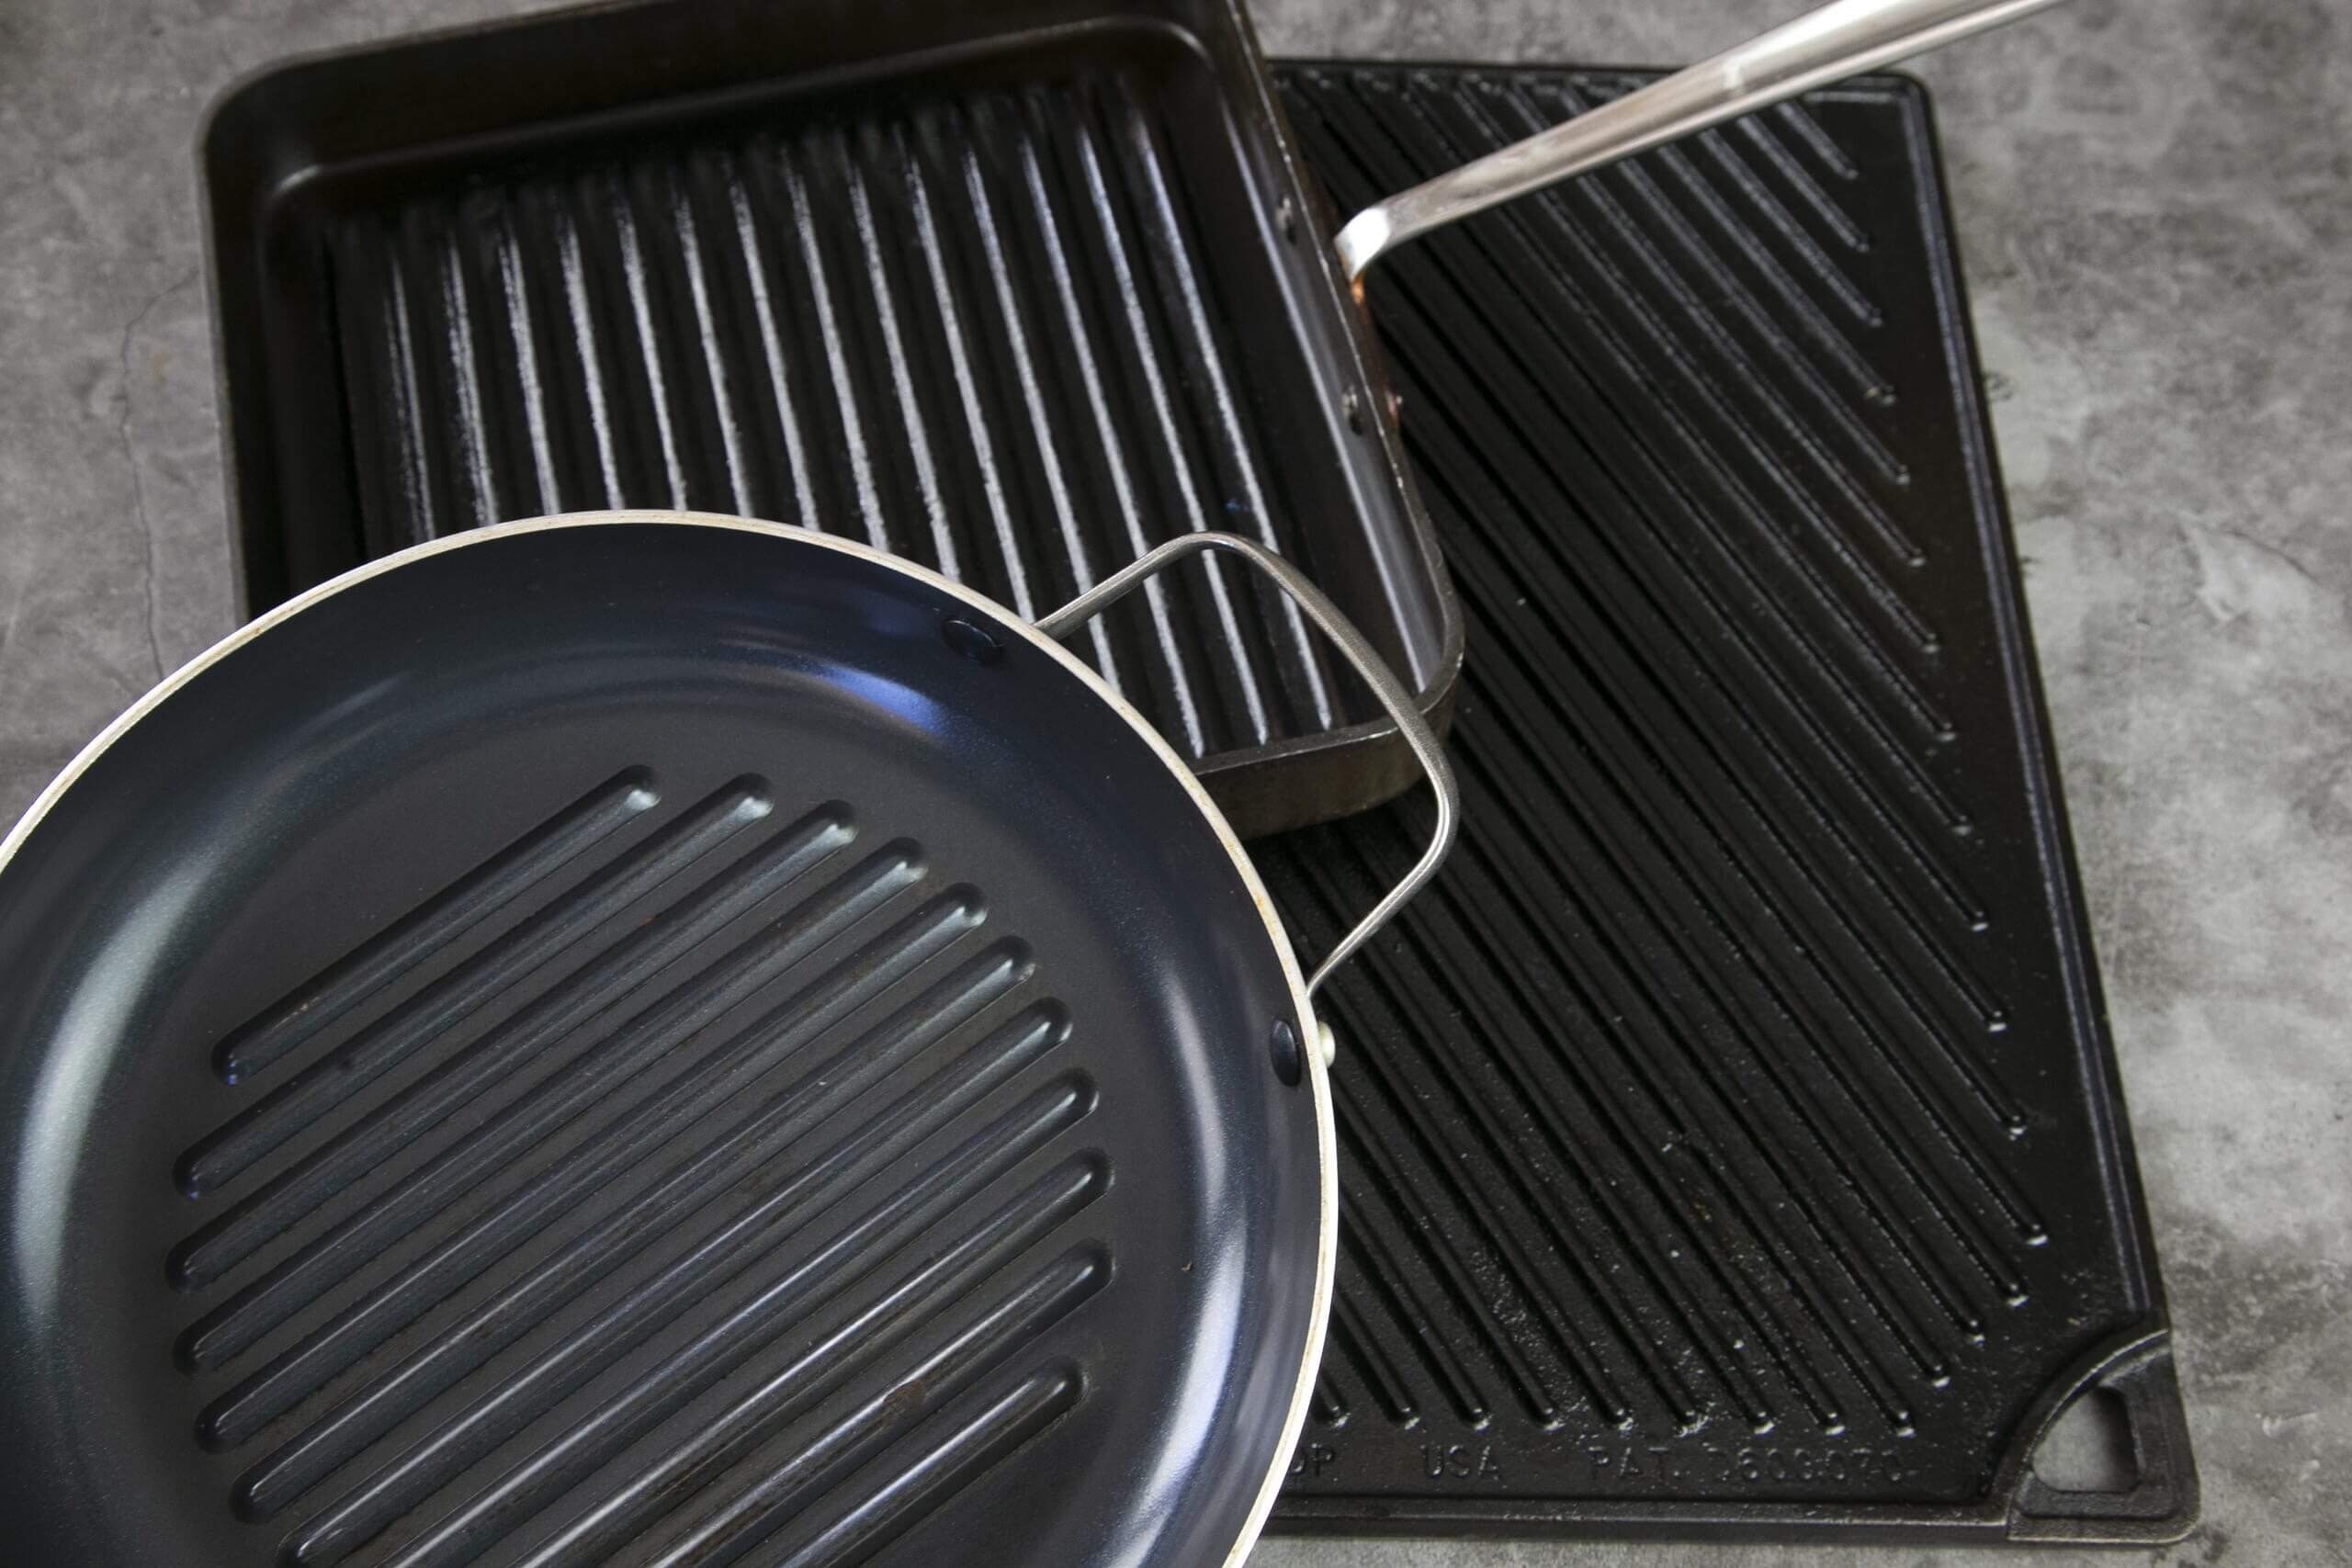 Pans too heavy will put a lot of pressure on the electric stovetop